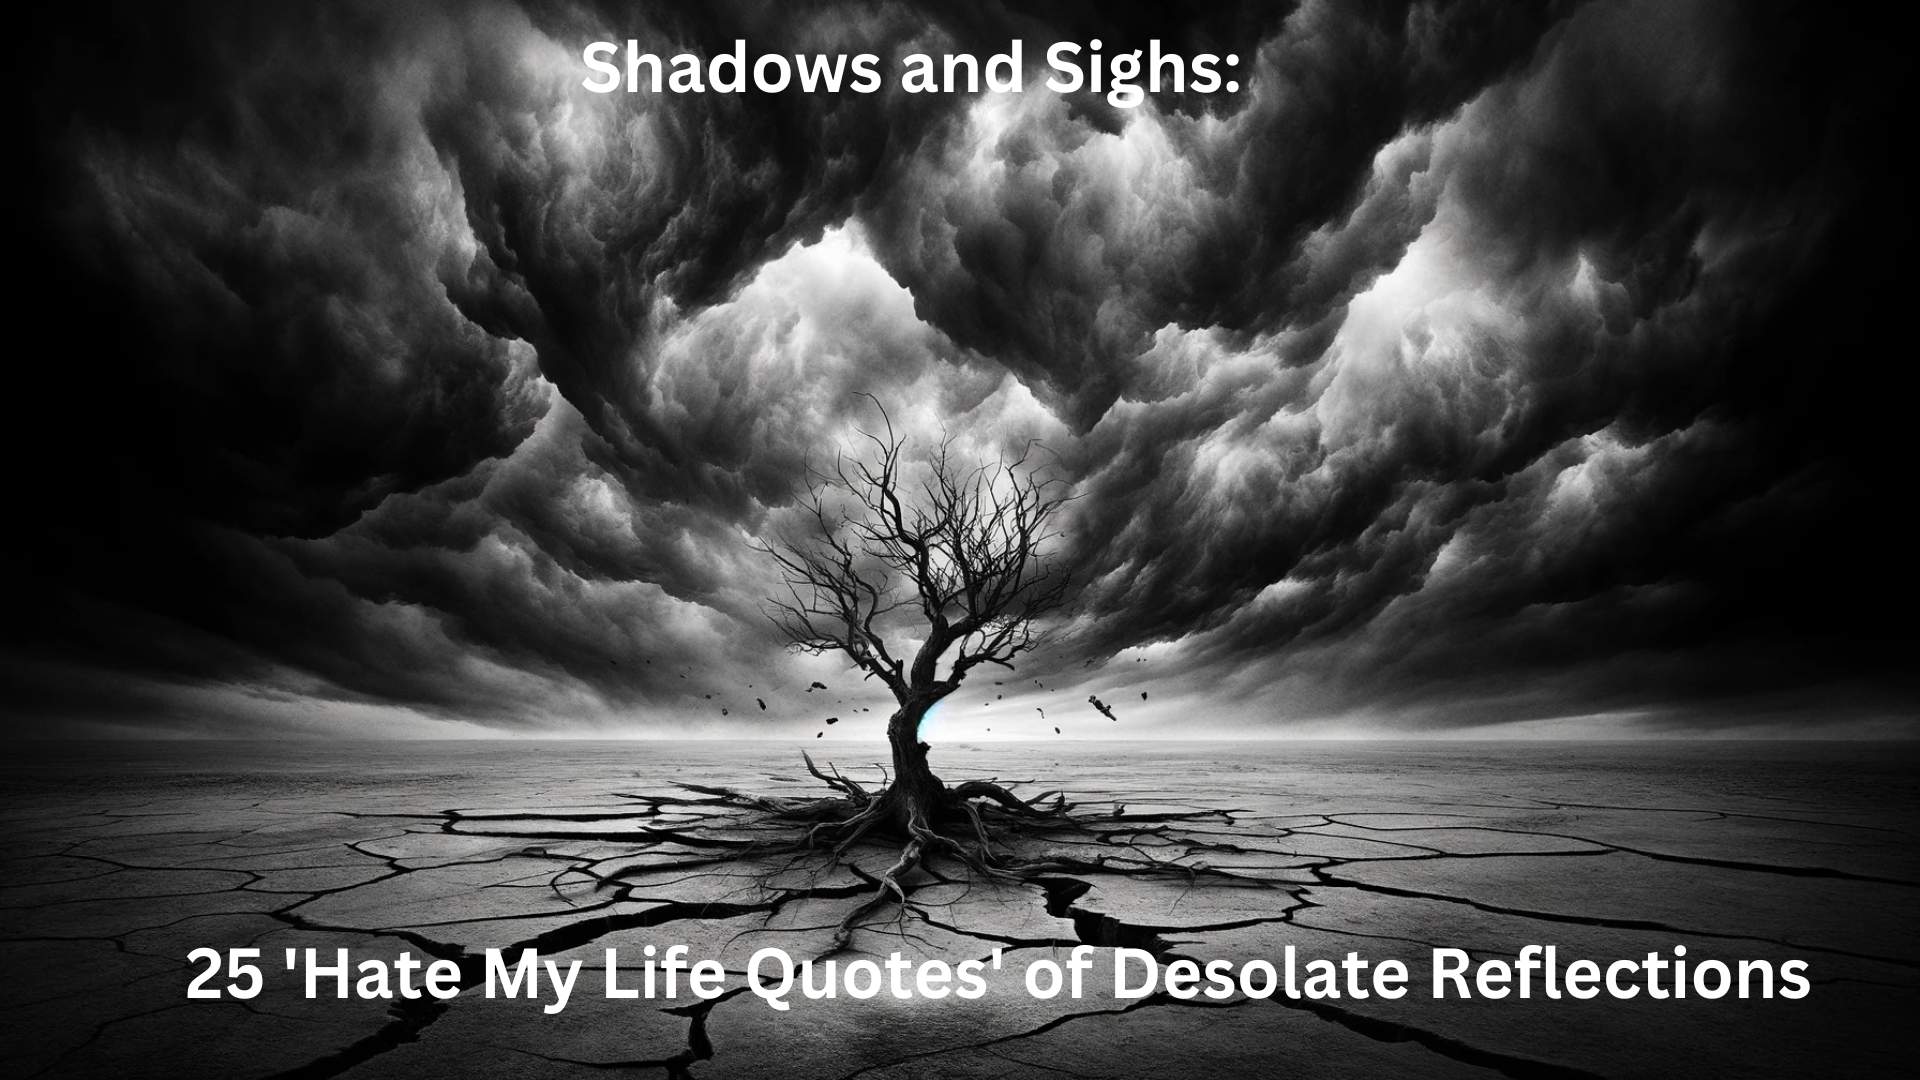 You are currently viewing Shadows and Sighs: 25 ‘Hate My Life Quotes’ of Desolate Reflections